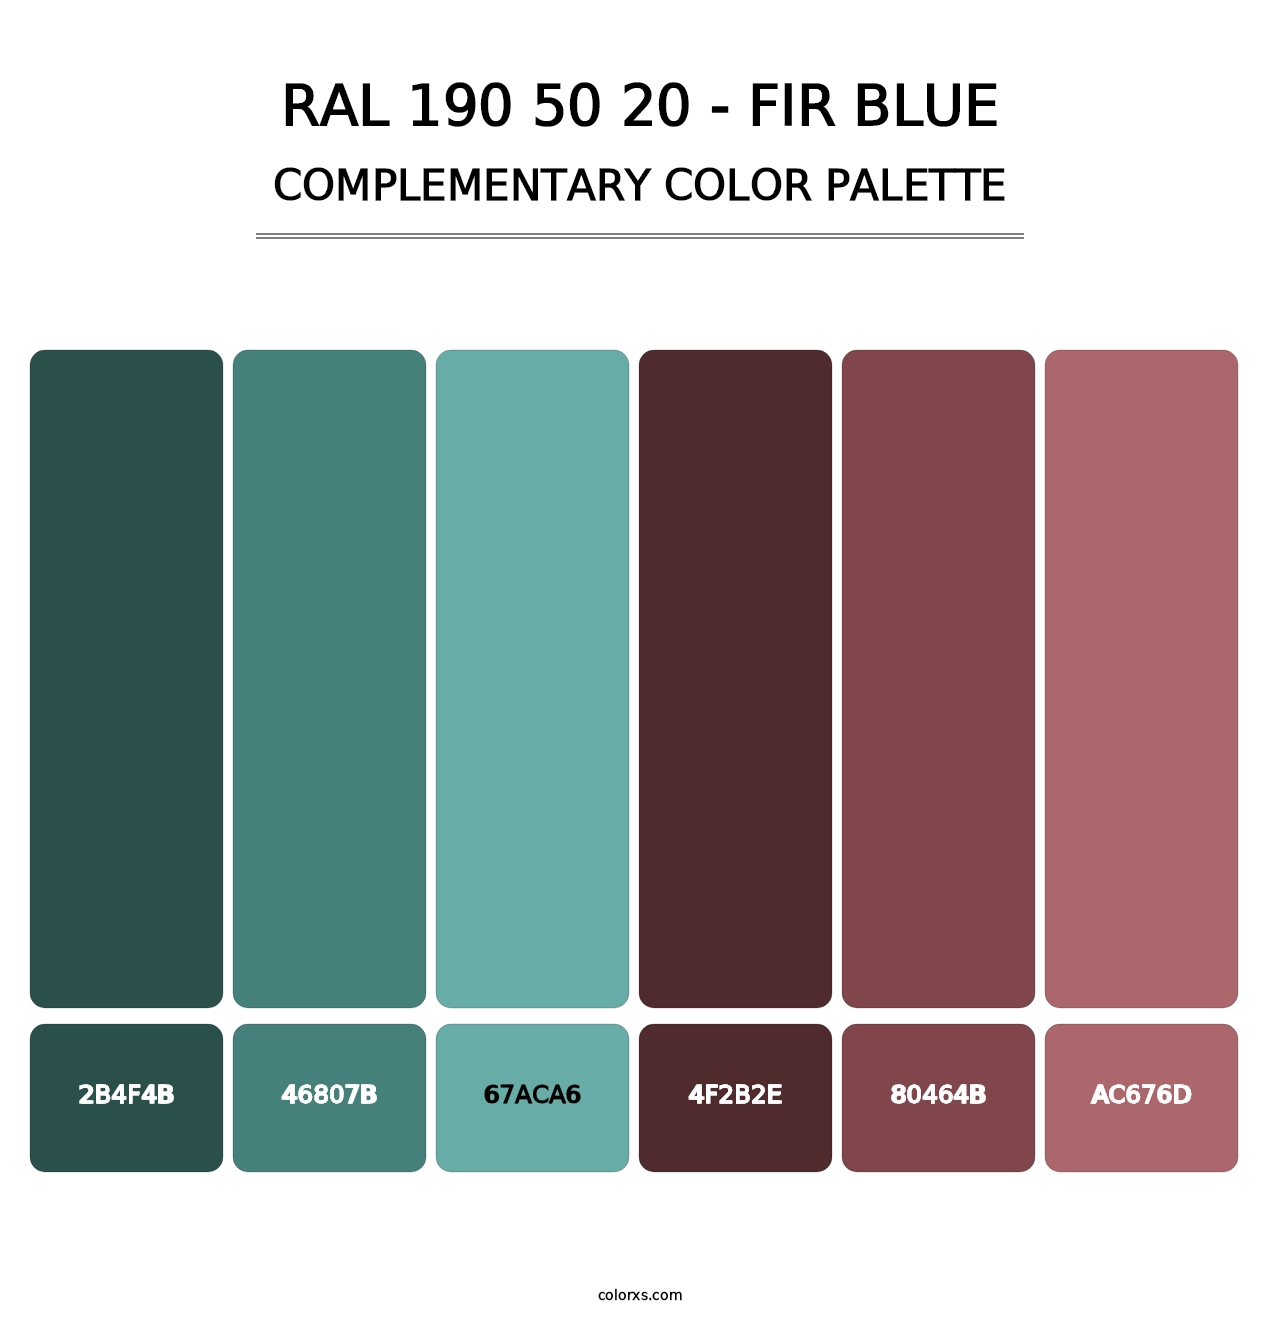 RAL 190 50 20 - Fir Blue - Complementary Color Palette